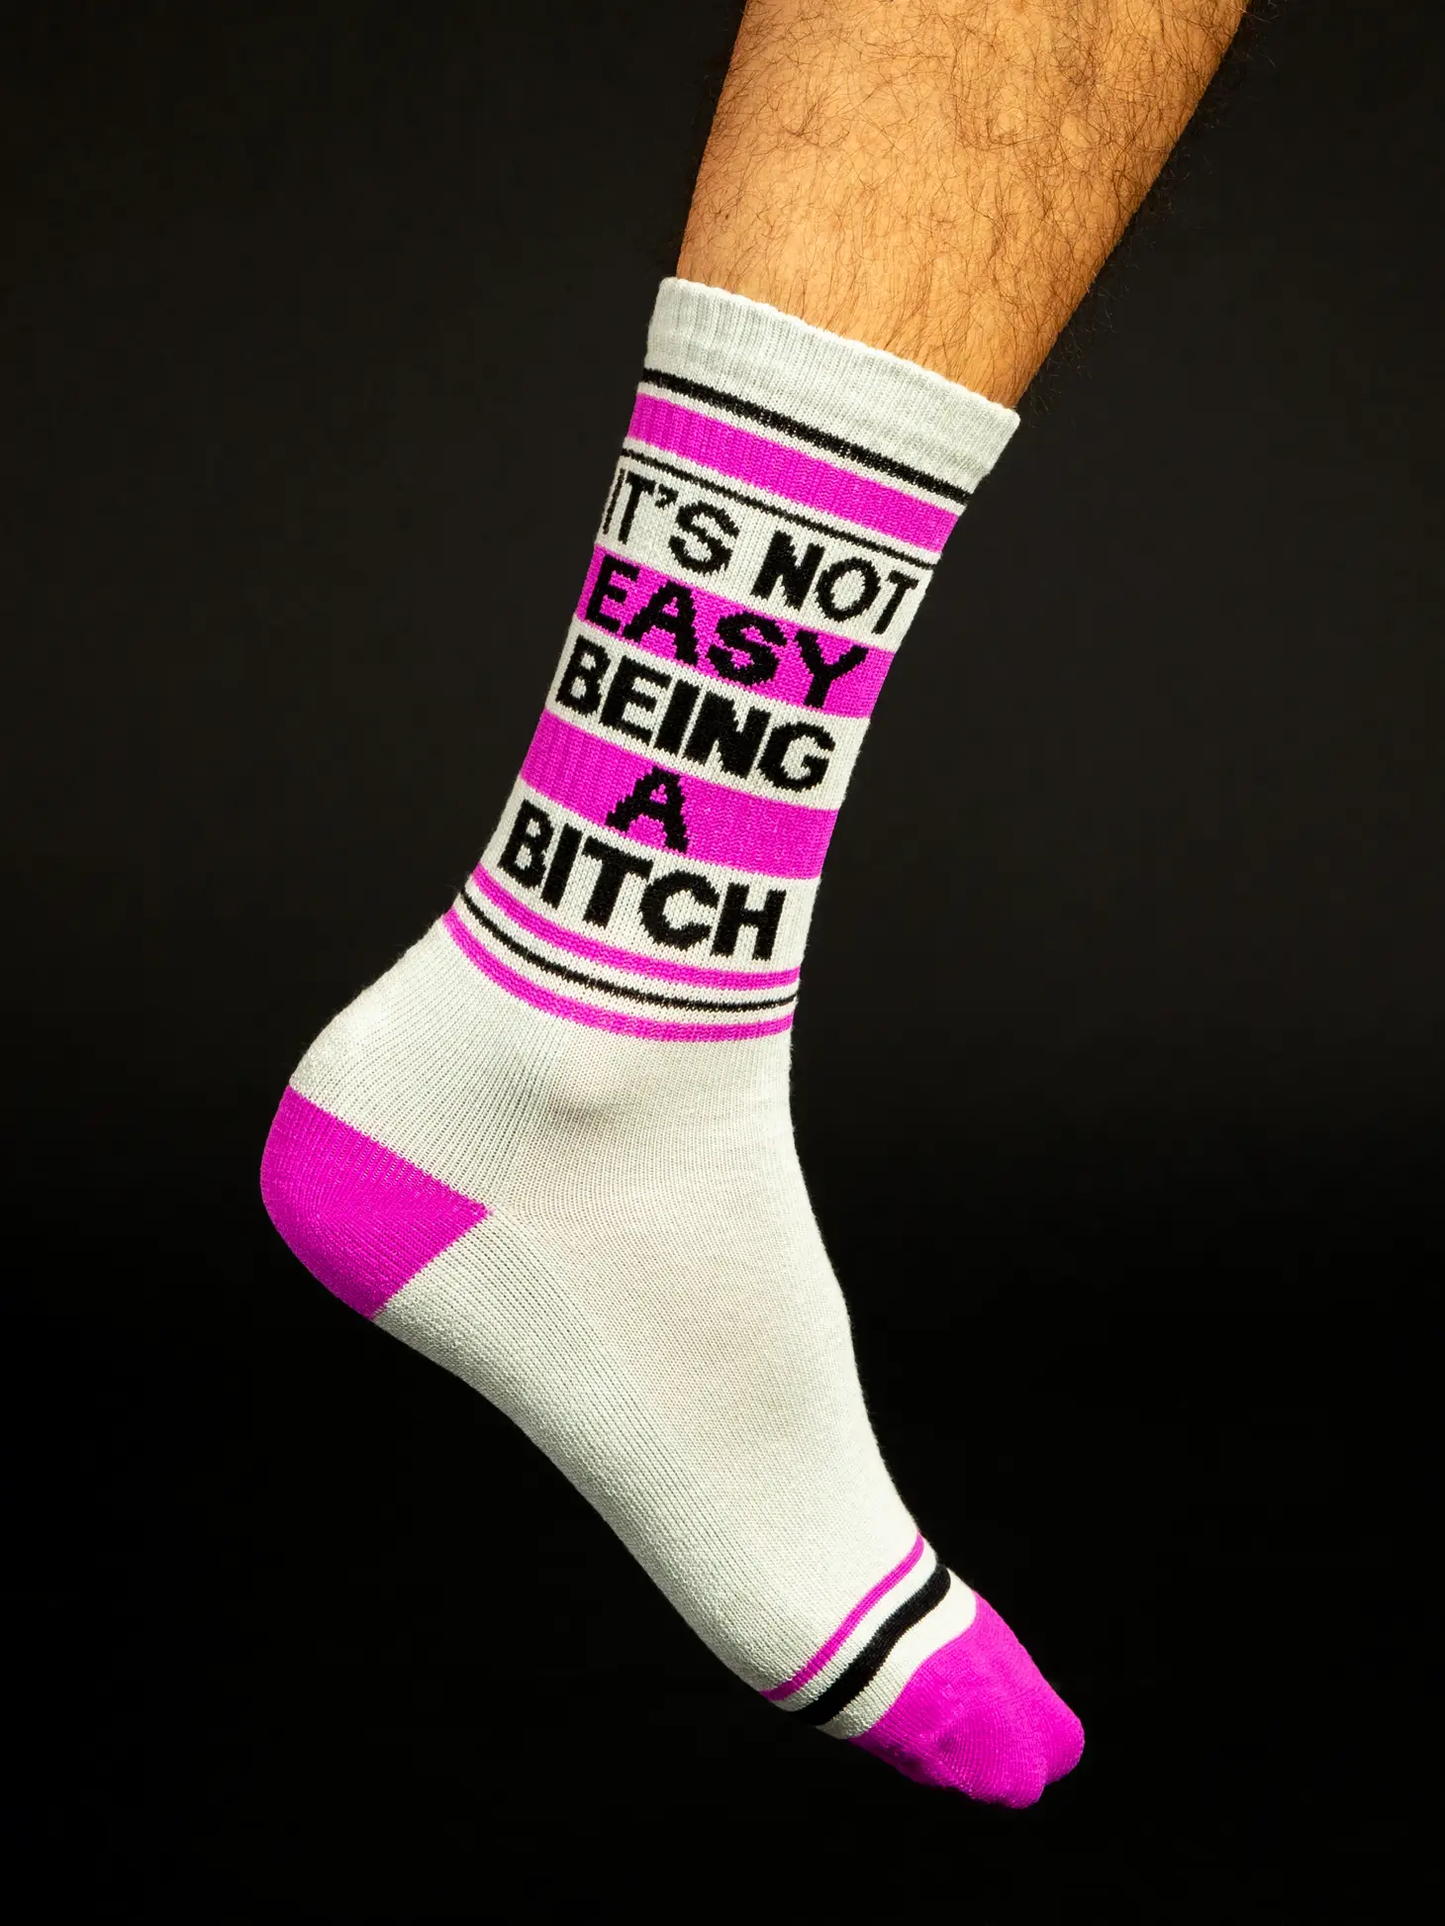 Its Not Easy Being a B*tch Sock